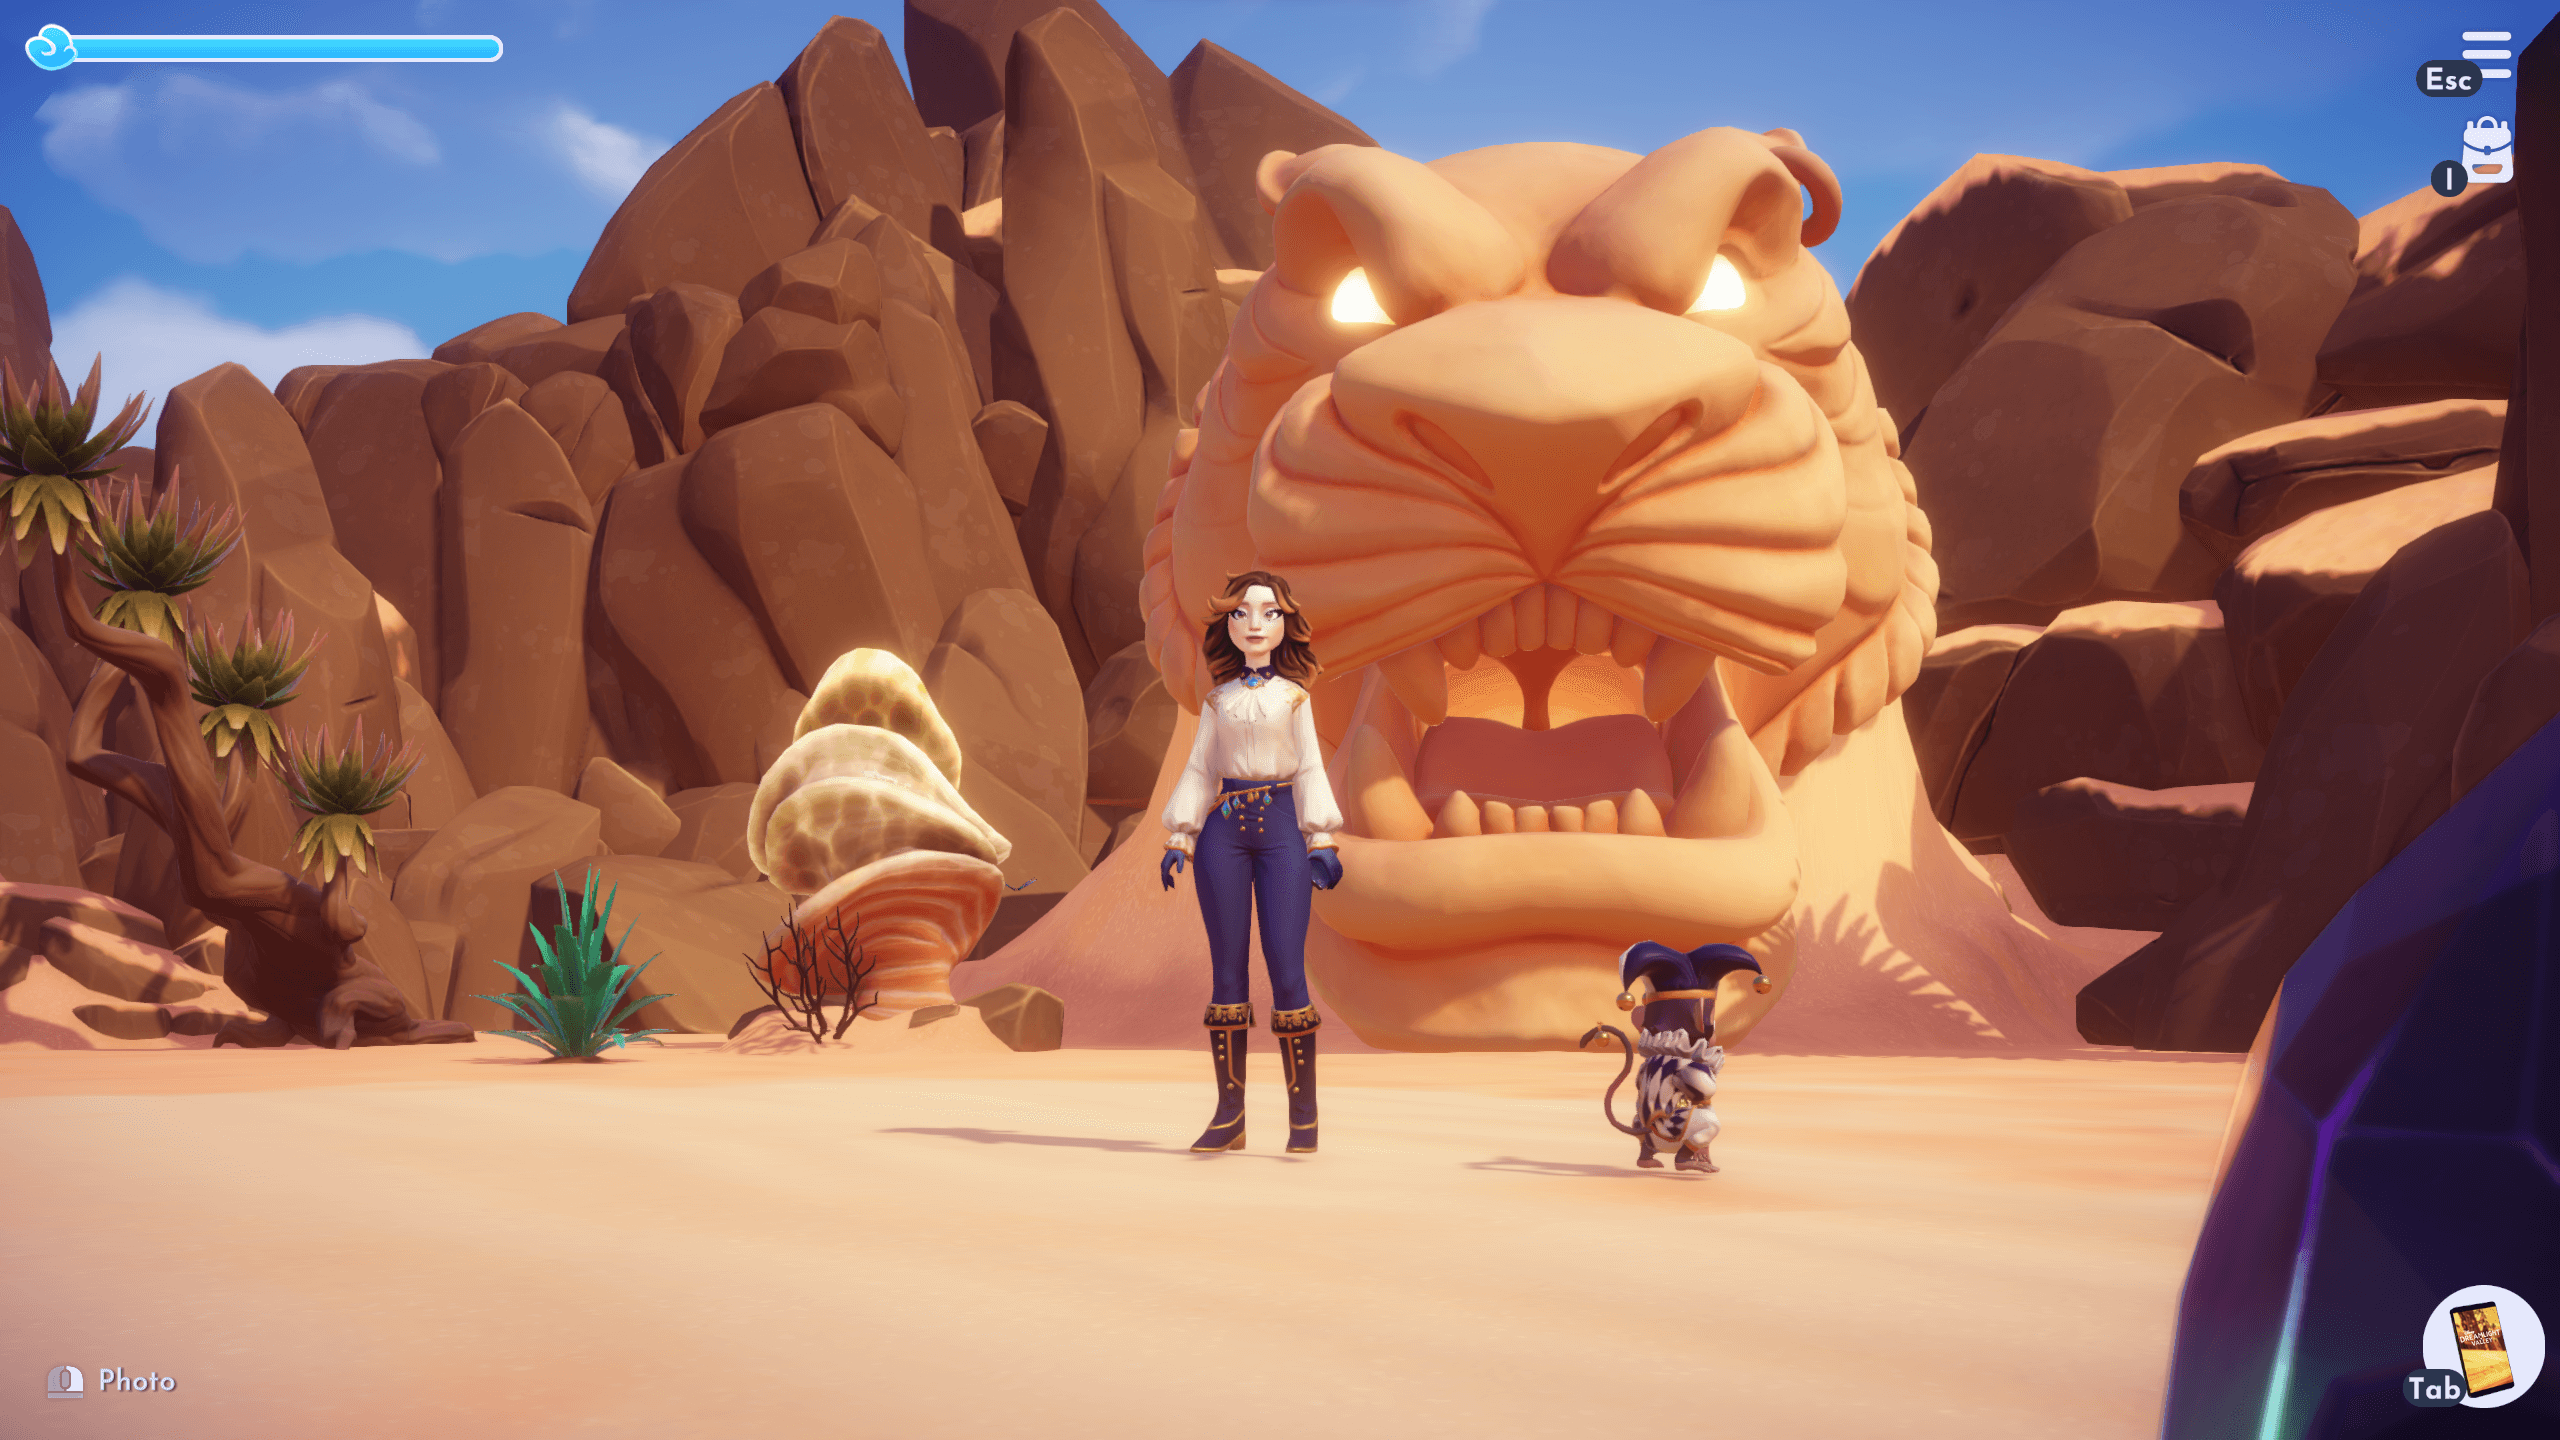 A screenshot of Disney Dreamlight Valley A Rift in Time. The character is wearing a cream shirt and blue trousers, with gilded gold accessories. They are placed in the sand biome with a large sand dune thats shaped into a tiger. 